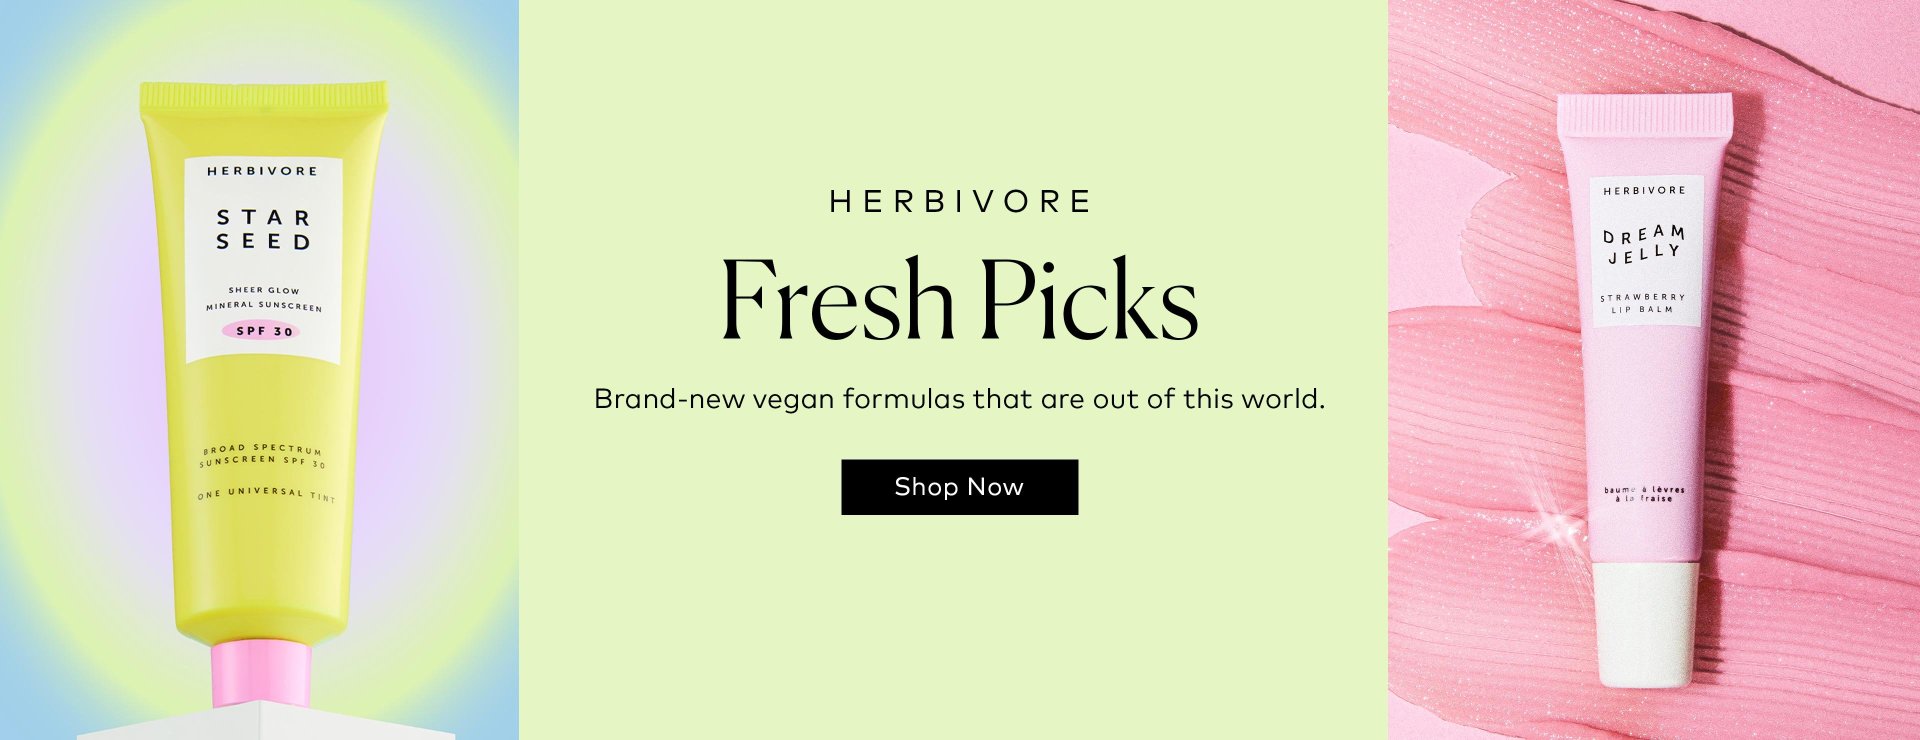 Shop the Herbivore Dream Jelly Strawberry Lip Balm & Star Seed Sheer Glow Mineral Sunscreen SPF 30 at Beautylish.com